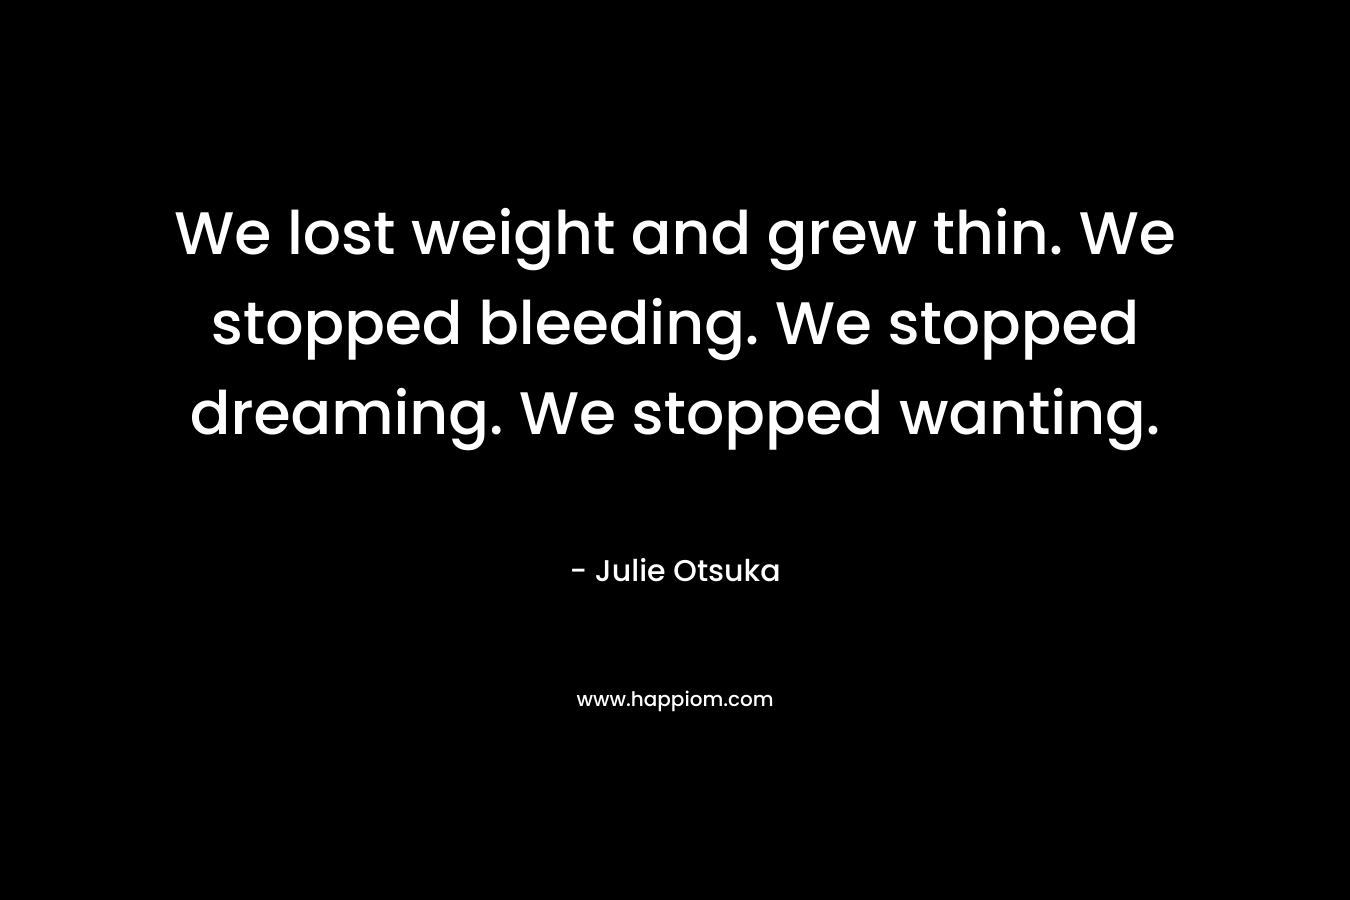 We lost weight and grew thin. We stopped bleeding. We stopped dreaming. We stopped wanting.